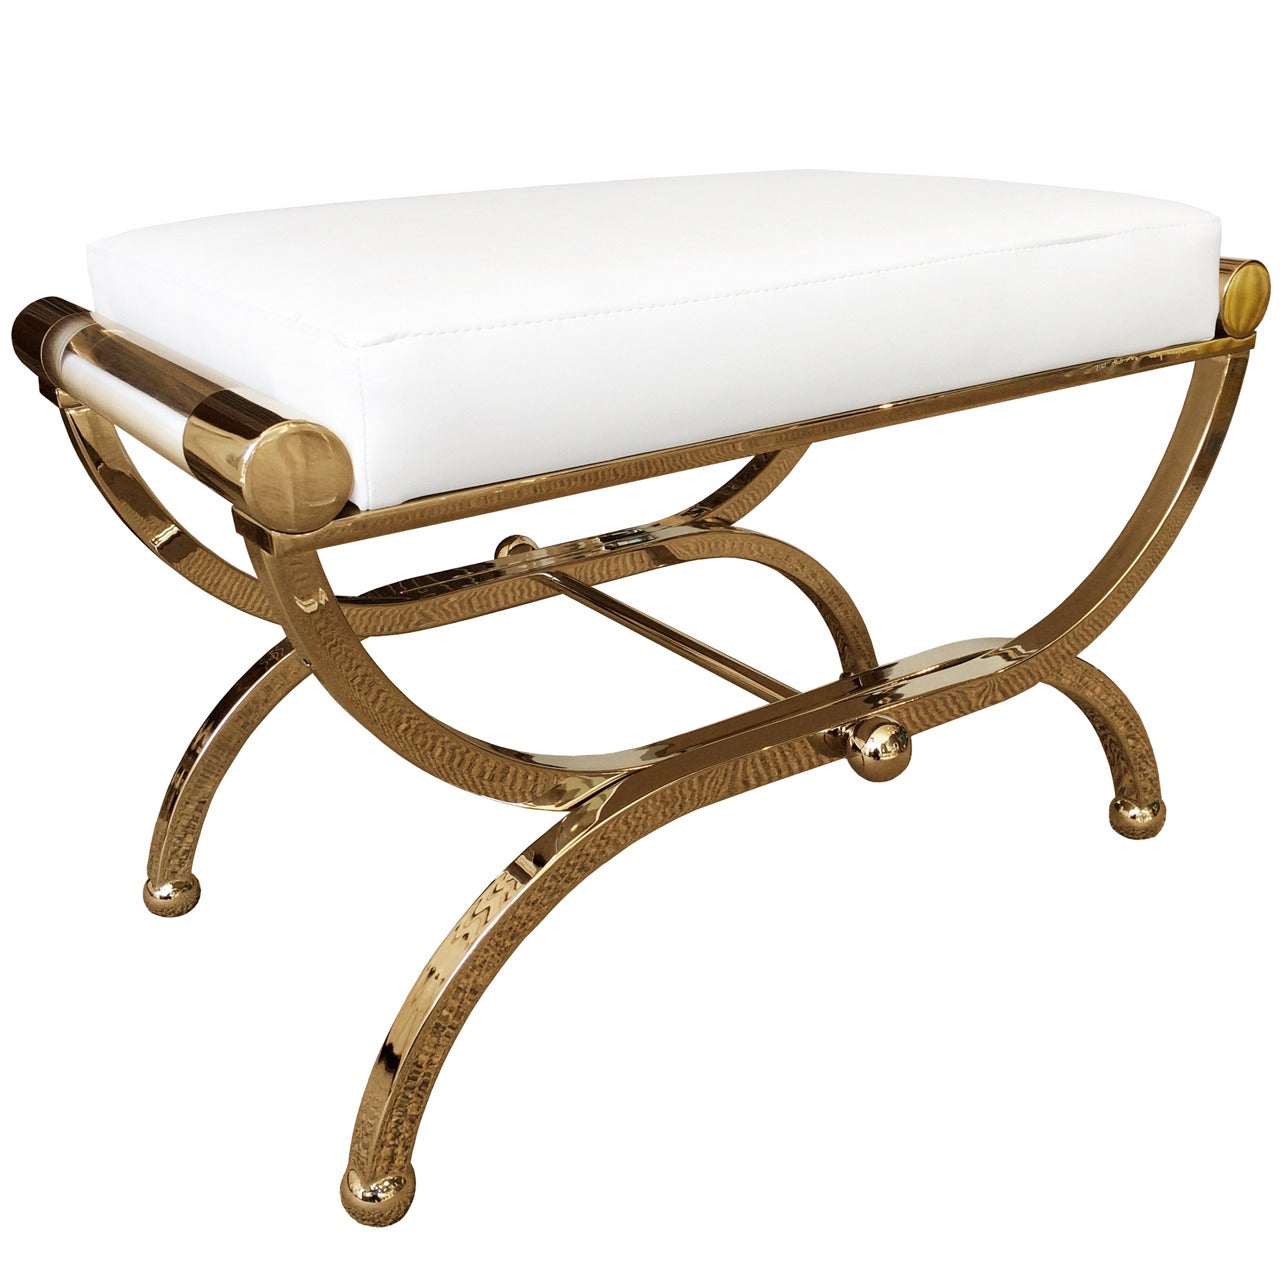 Charles Hollis Jones "Empire" Style Bench in Brass and Lucite